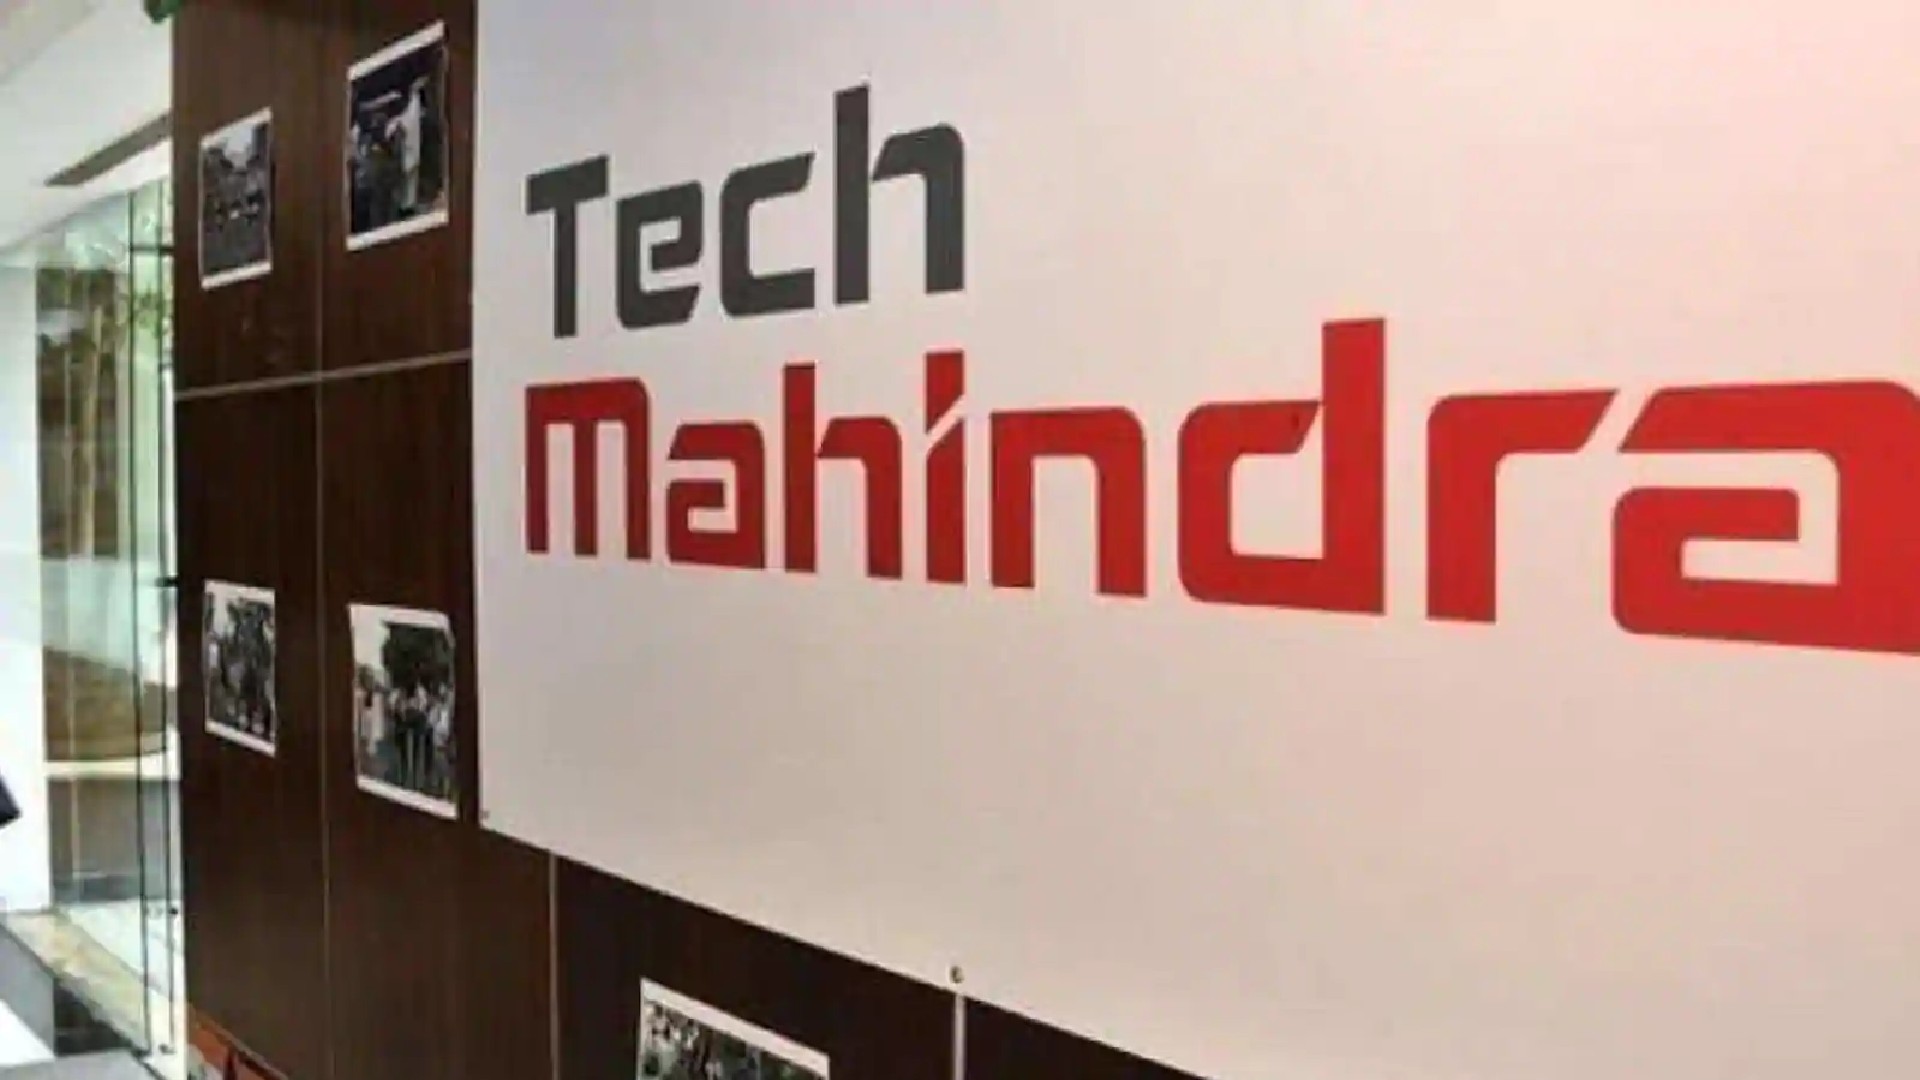 Tech Mahindra Will Have Exclusively 60% Indian Employees, Plans For Massive Hiring.